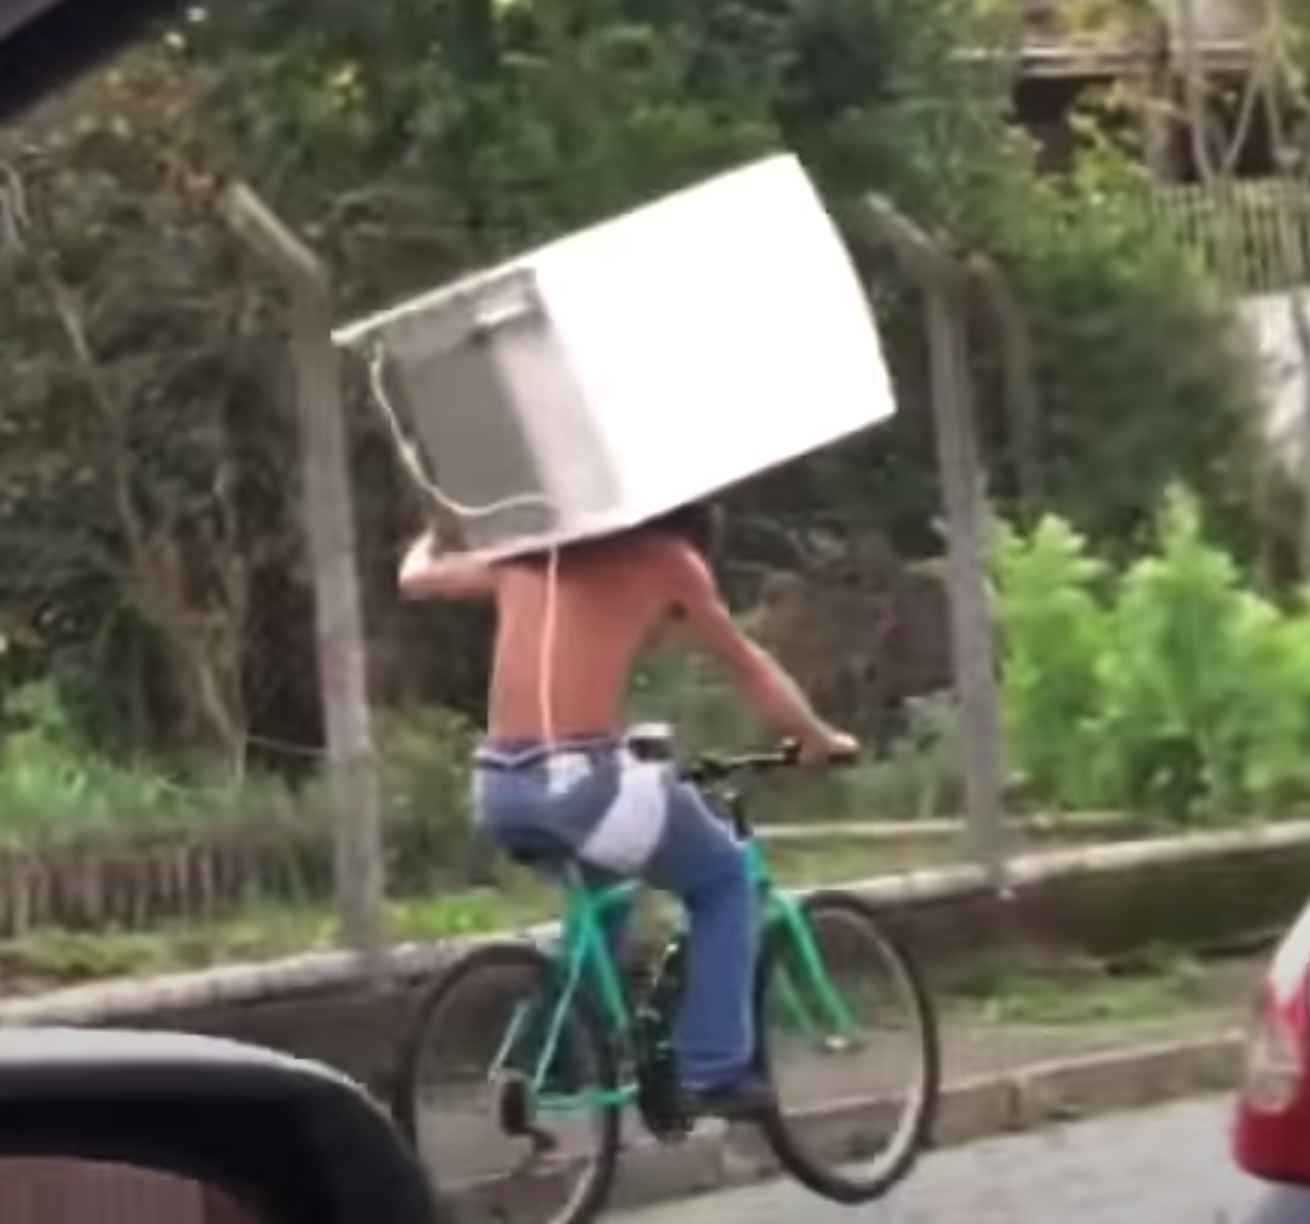 Man carrying refrigerator on bicycle, journal of wild culture, ©2020